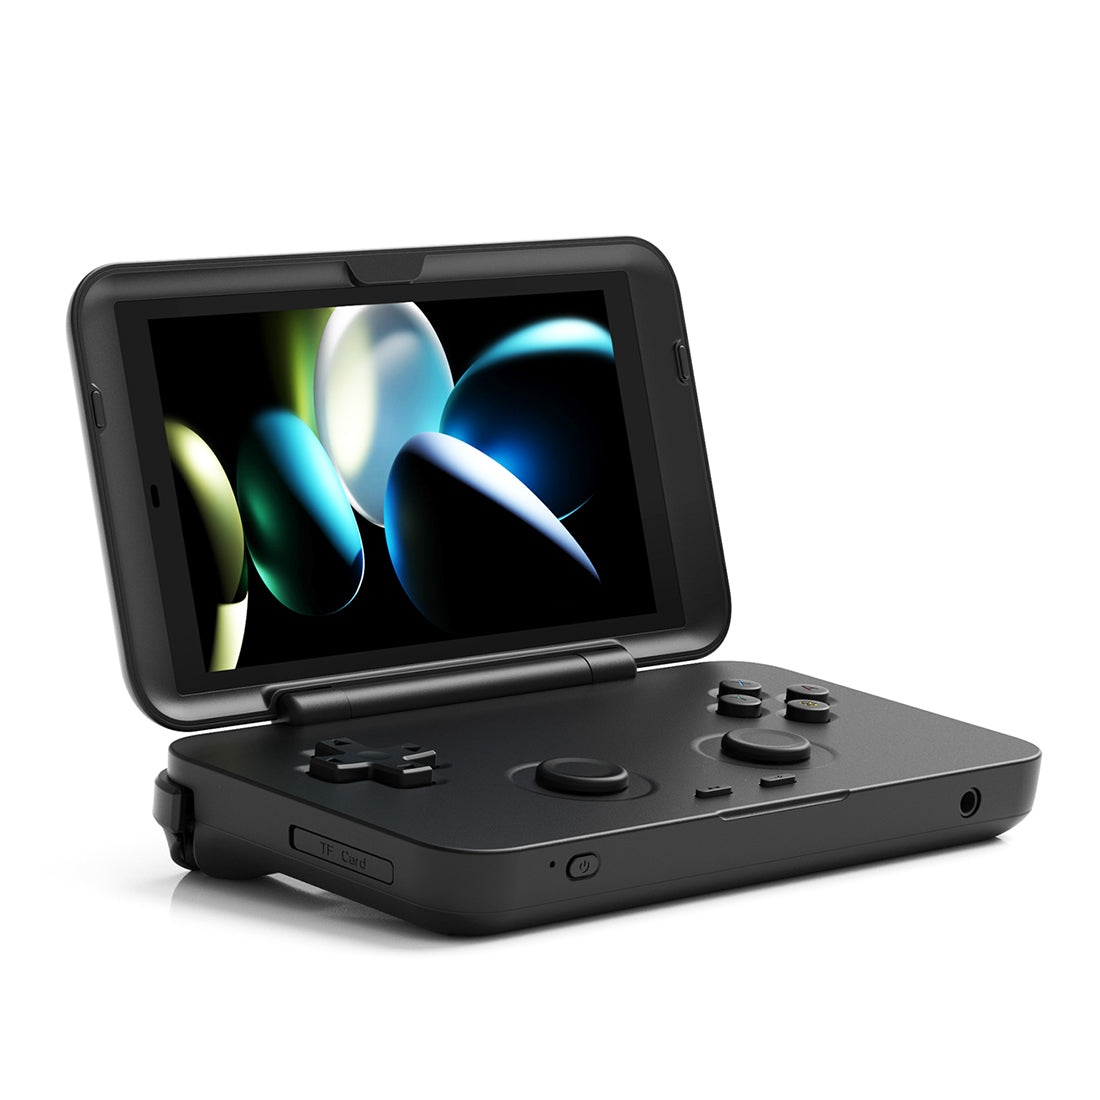 litnxt-Retroid-Pocket-Flip-Android-Handheld-Game-Console-2